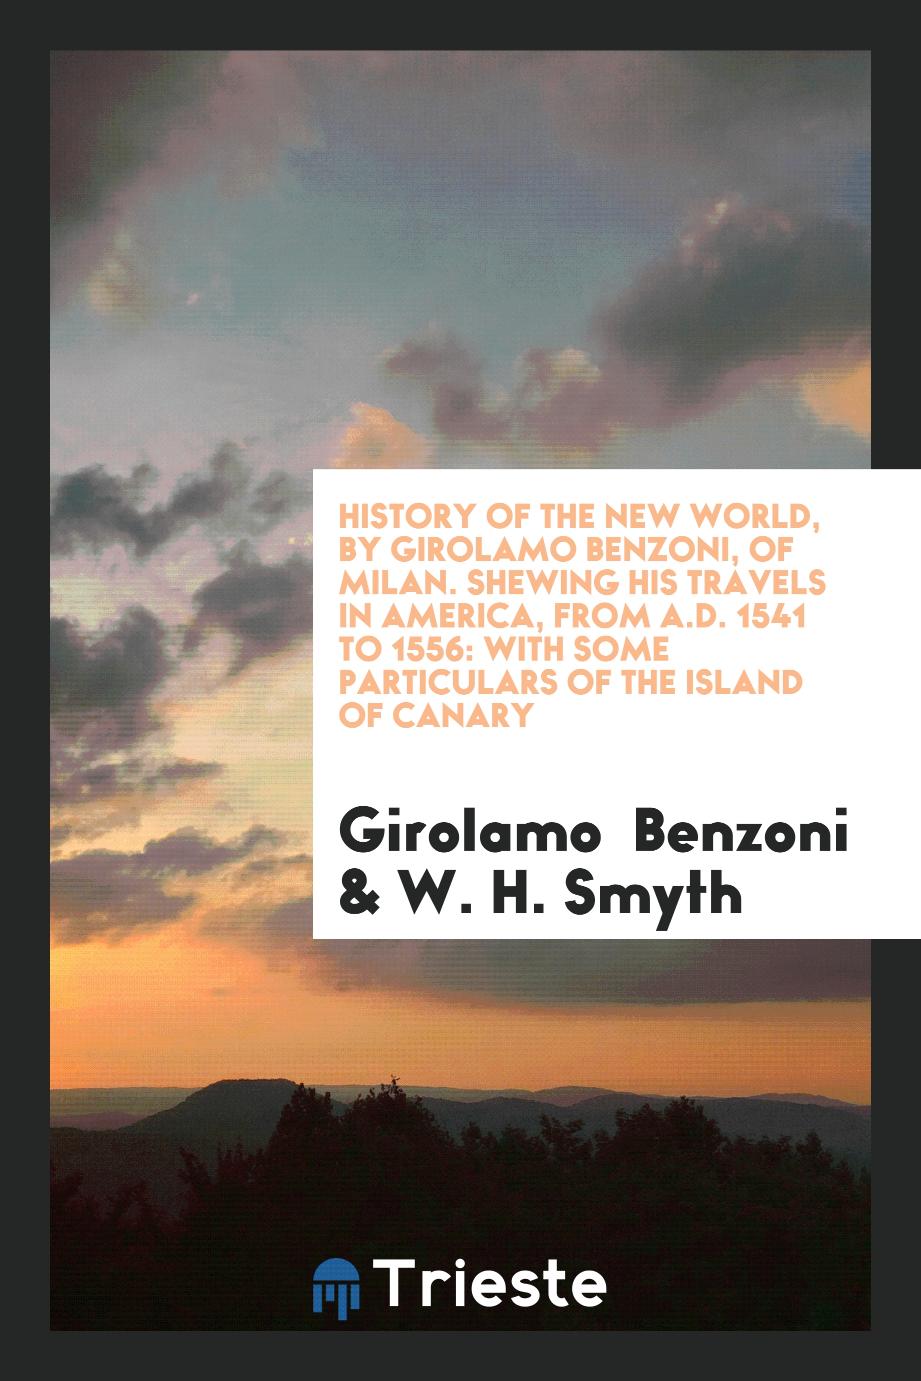 History of the New World, by Girolamo Benzoni, of Milan. Shewing His Travels in America, from A.D. 1541 to 1556: With Some Particulars of the Island of Canary